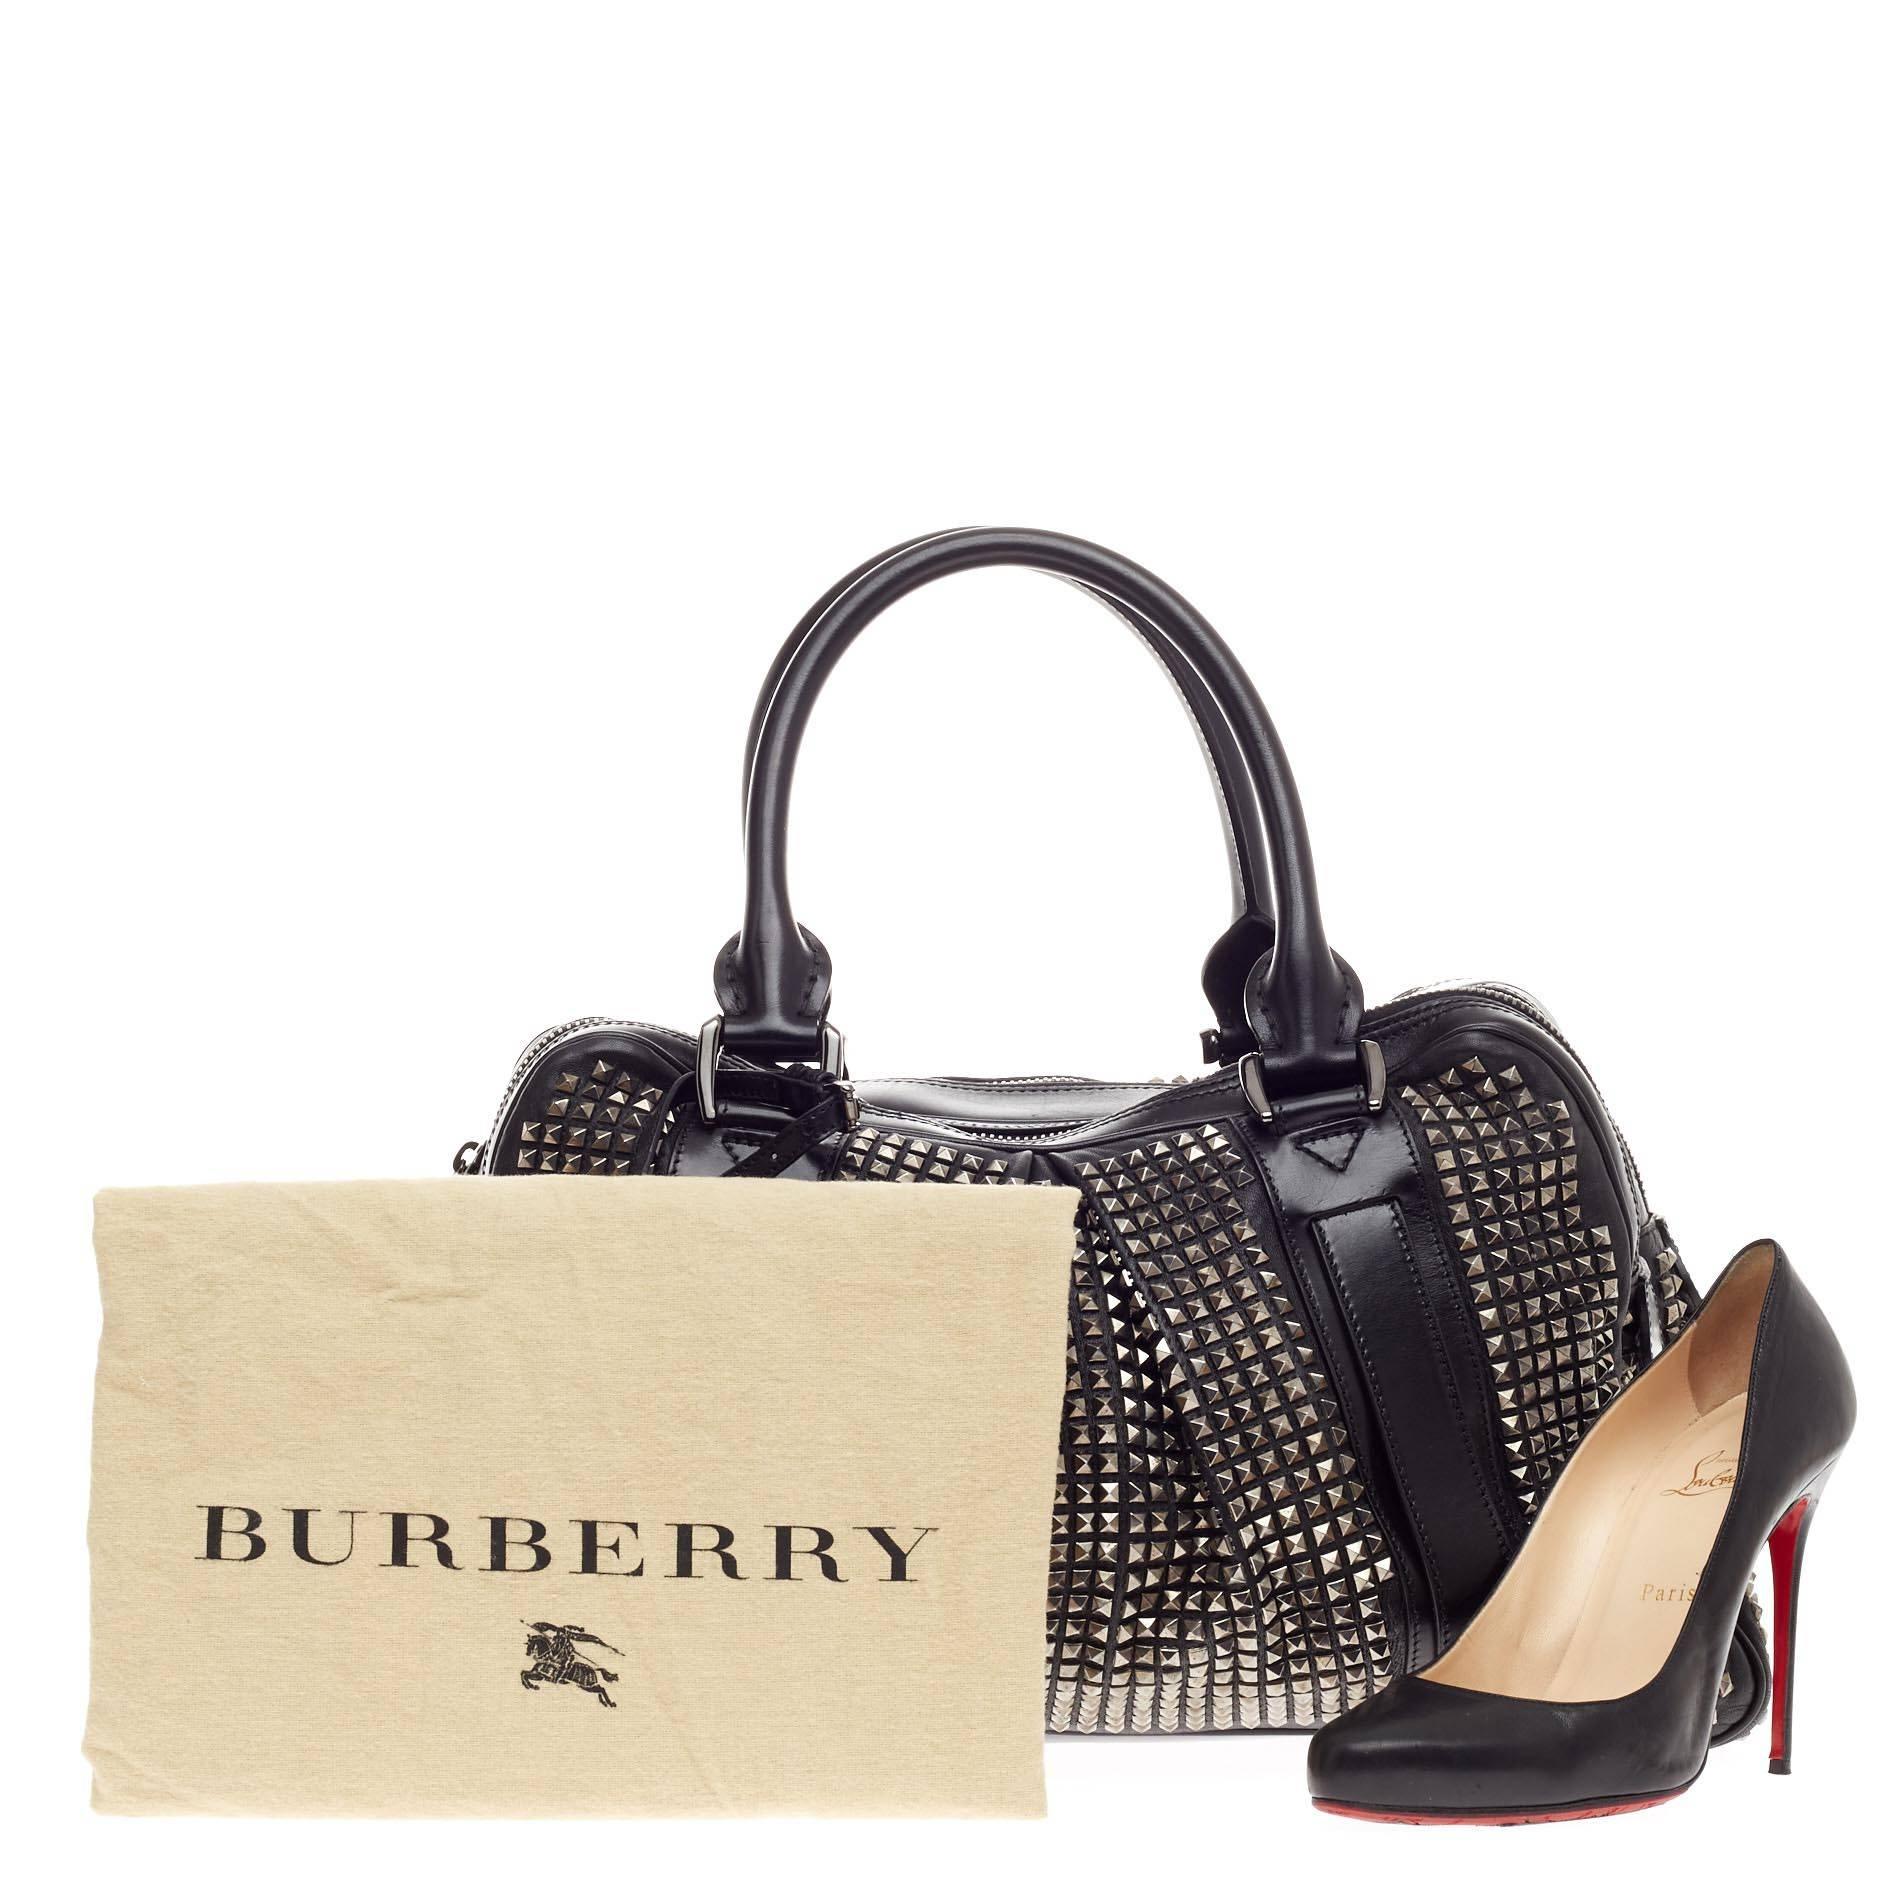 This authentic Burberry Knight Bag Studded Leather from its 2012 Collection is a stunning, sold-out, medieval-inspired piece beloved by many. Crafted in black leather with feminine pleated detailing, this edgy bag features embellished chrome-tone